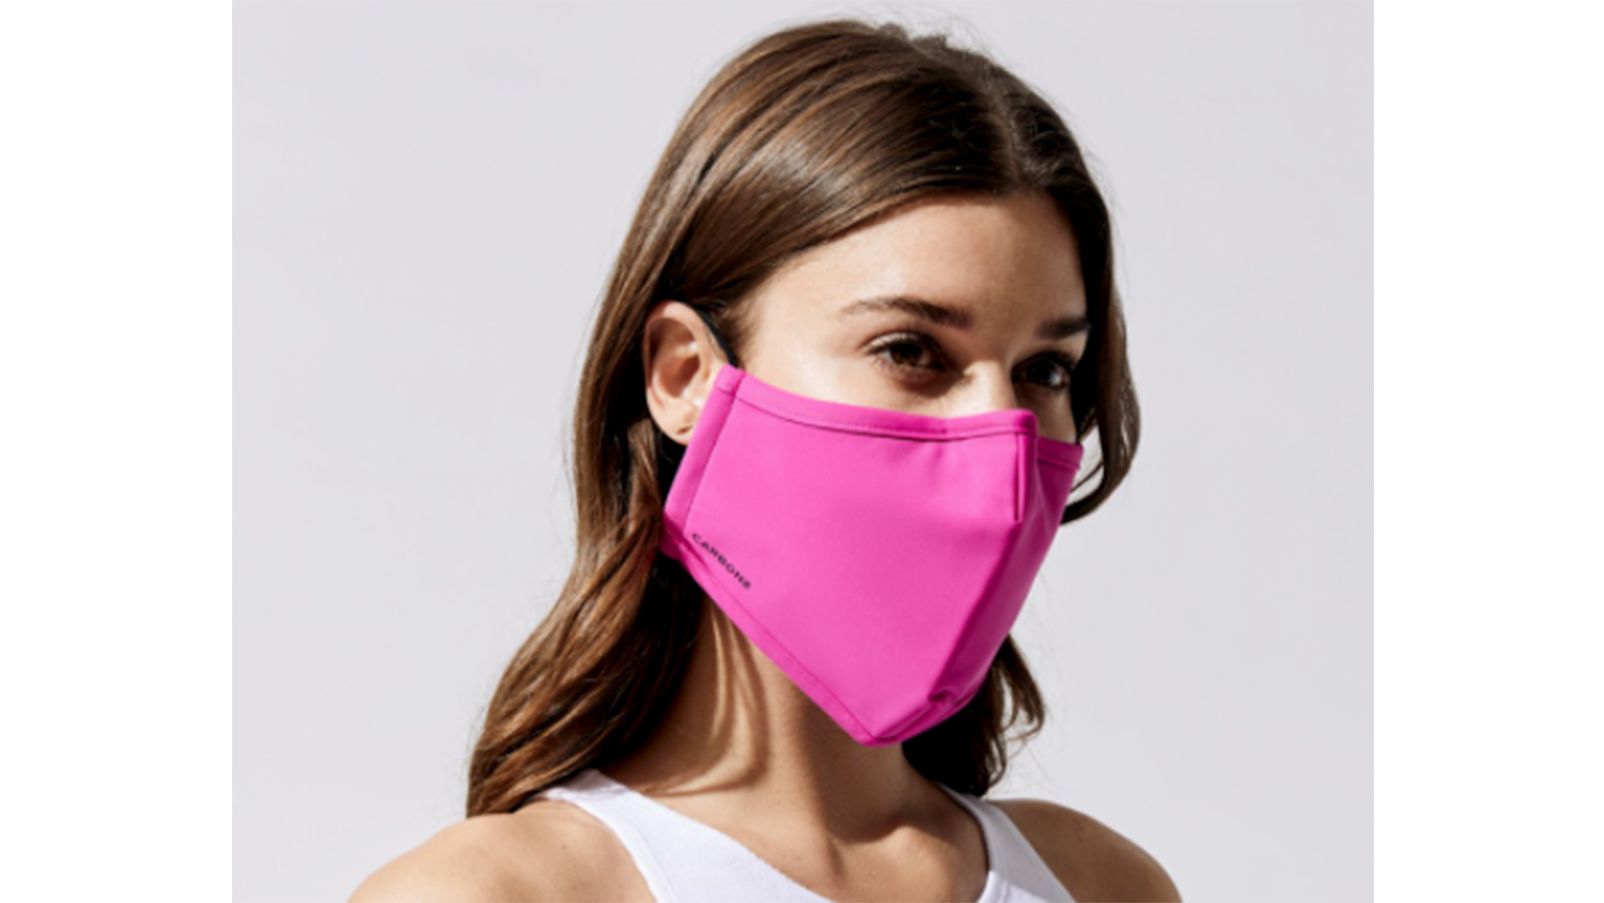 20 Best Comfy, Breathable Face Masks To Work Out In Per Experts